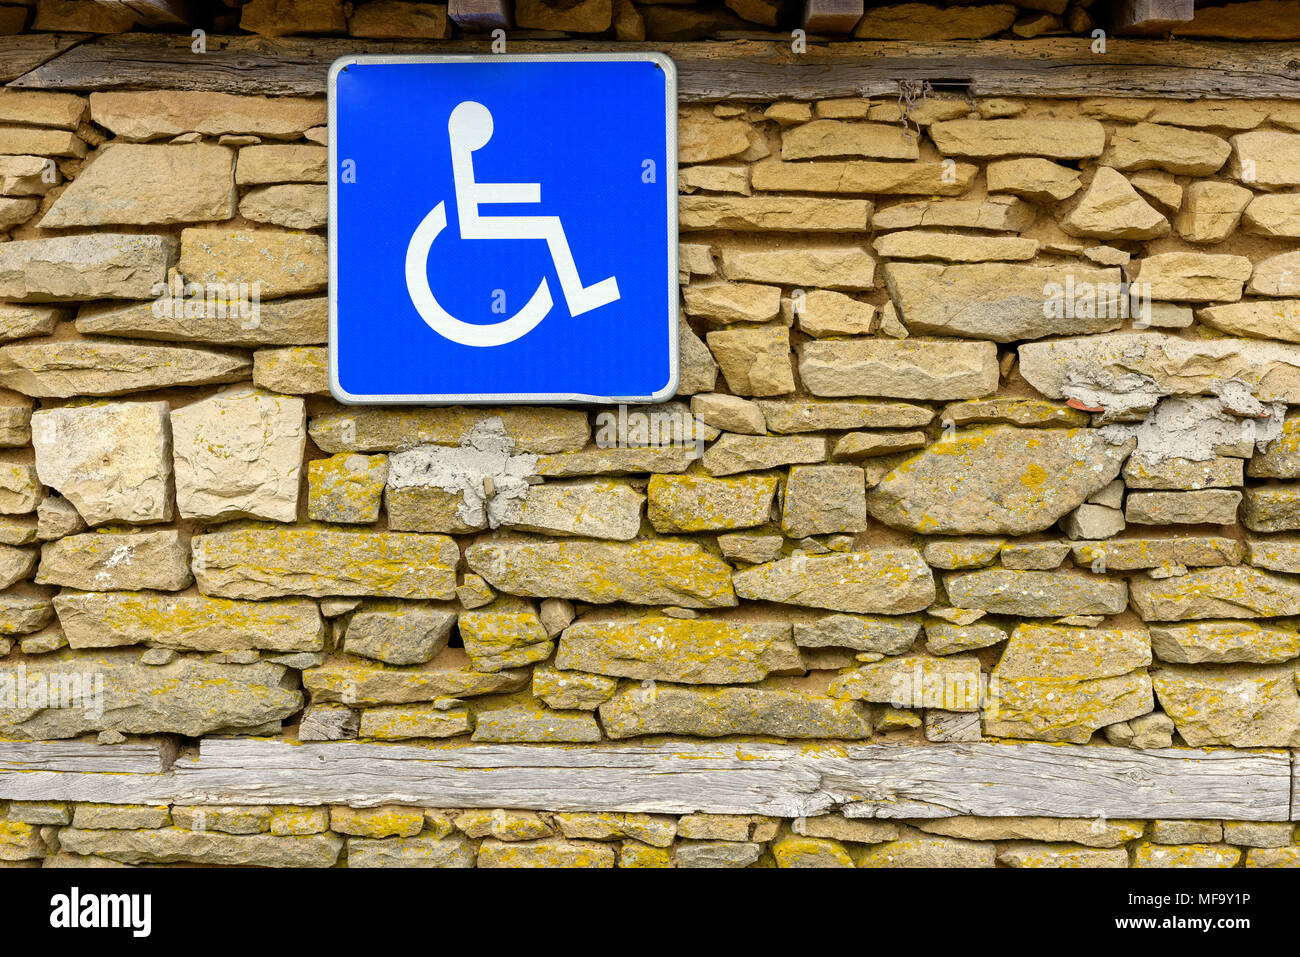 Traffic sign indicating parking for persons with disabilities hanging on rough stone wall, Disabled Access Sign, Handicap Accessible Sign Stock Photo